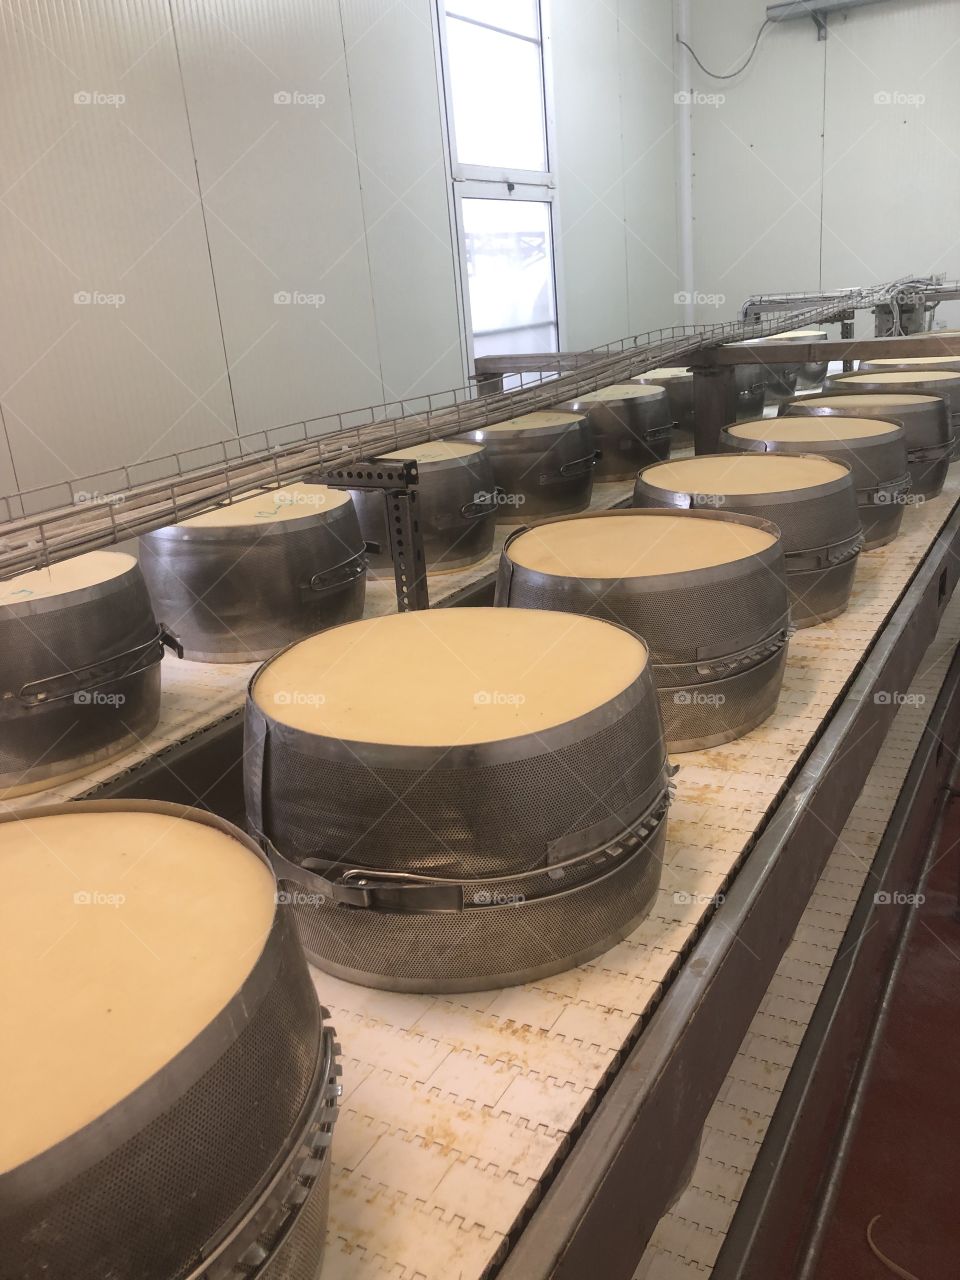 Parmesan in the factory